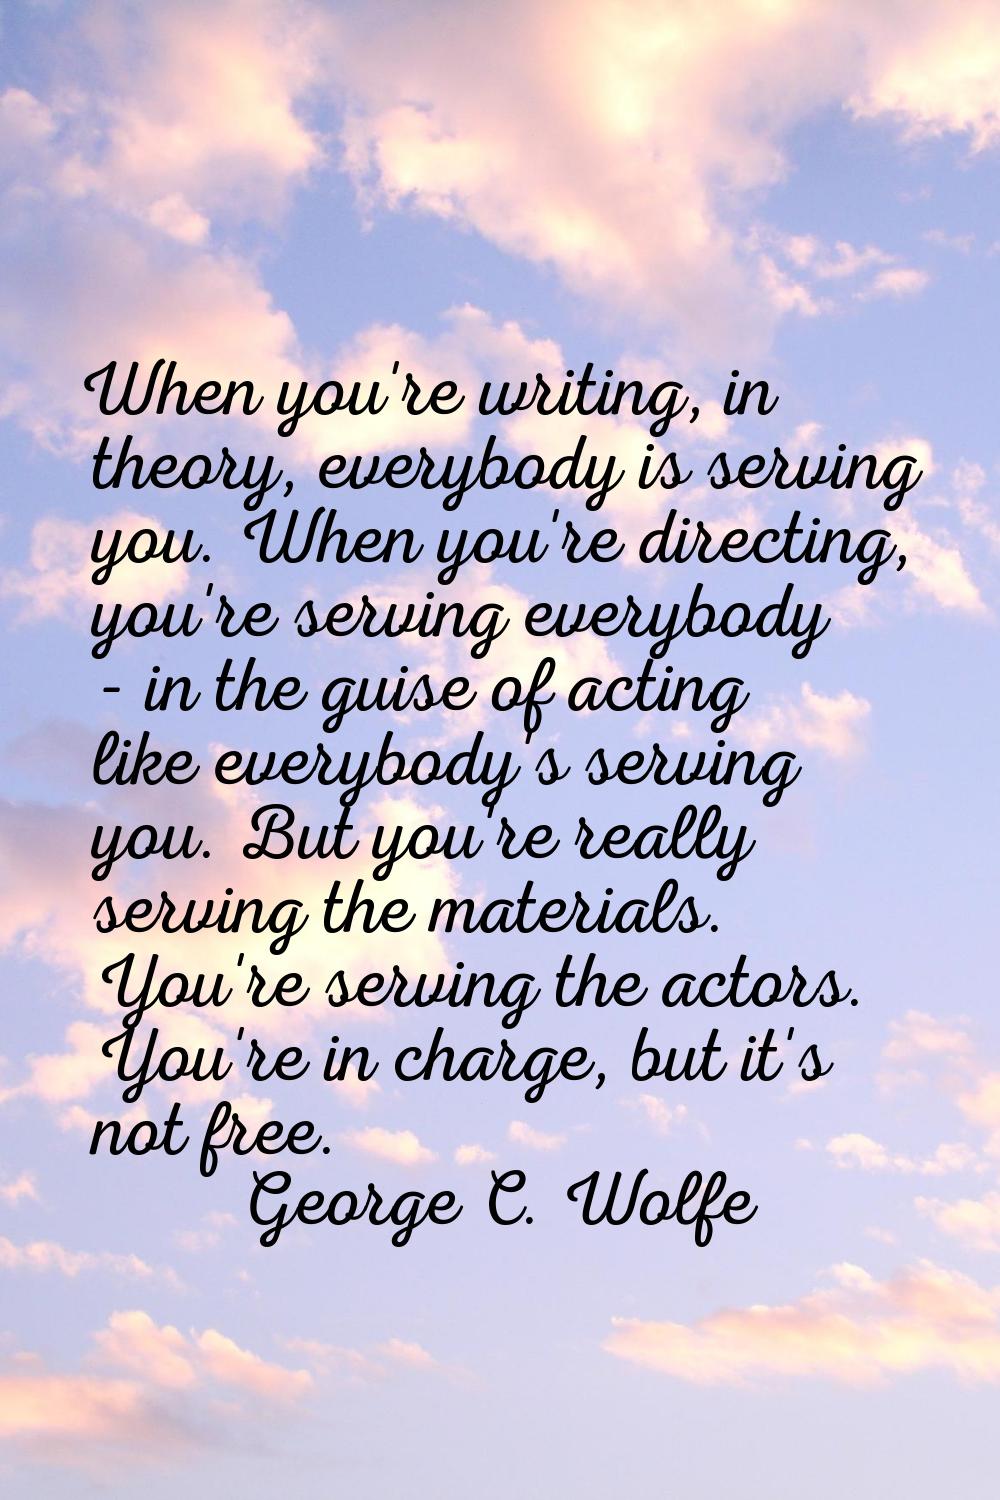 When you're writing, in theory, everybody is serving you. When you're directing, you're serving eve